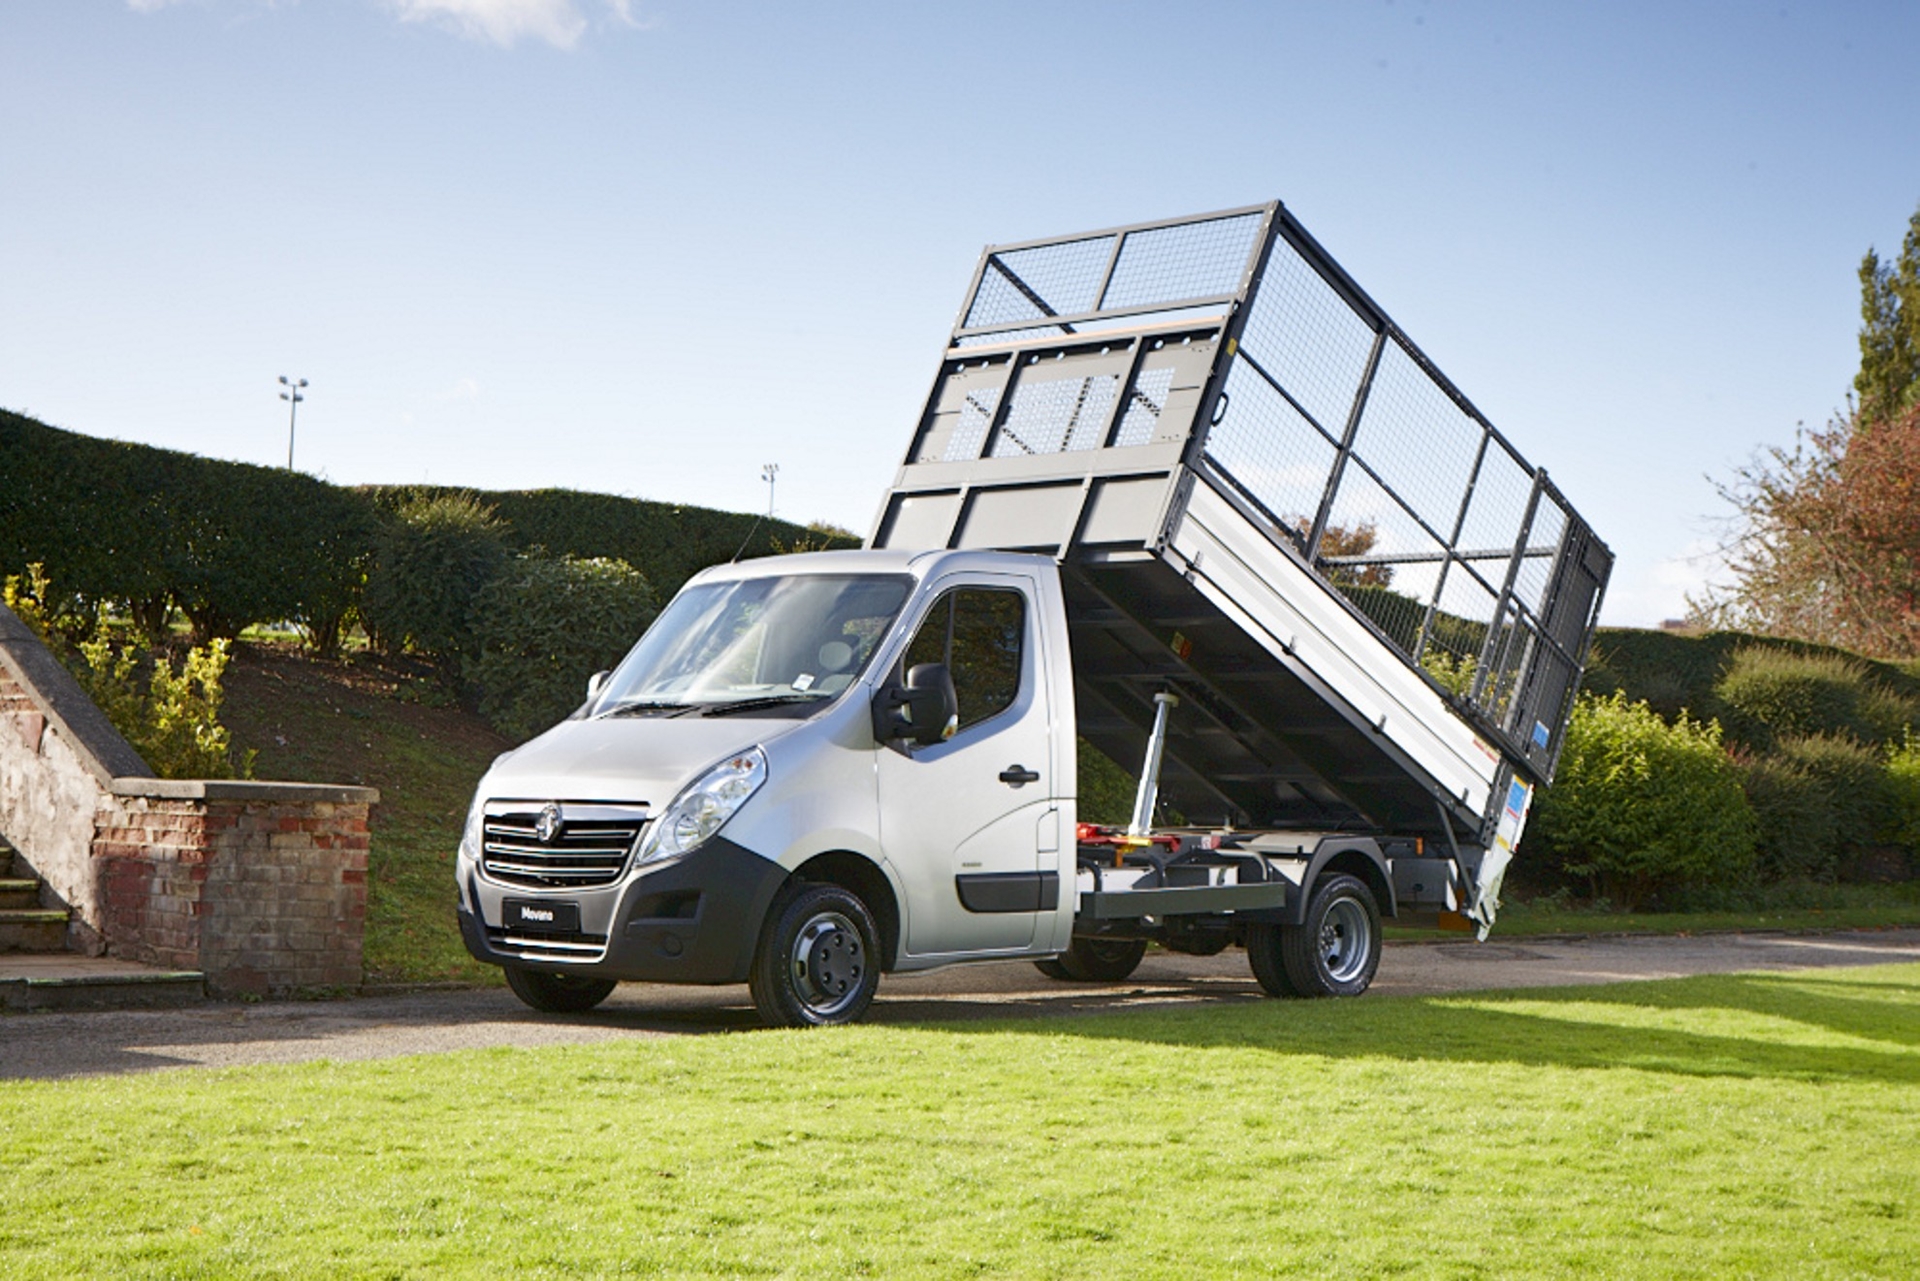 VAUXHALL AND VFS COLLABORATE ON NEW CAGED TIPPER